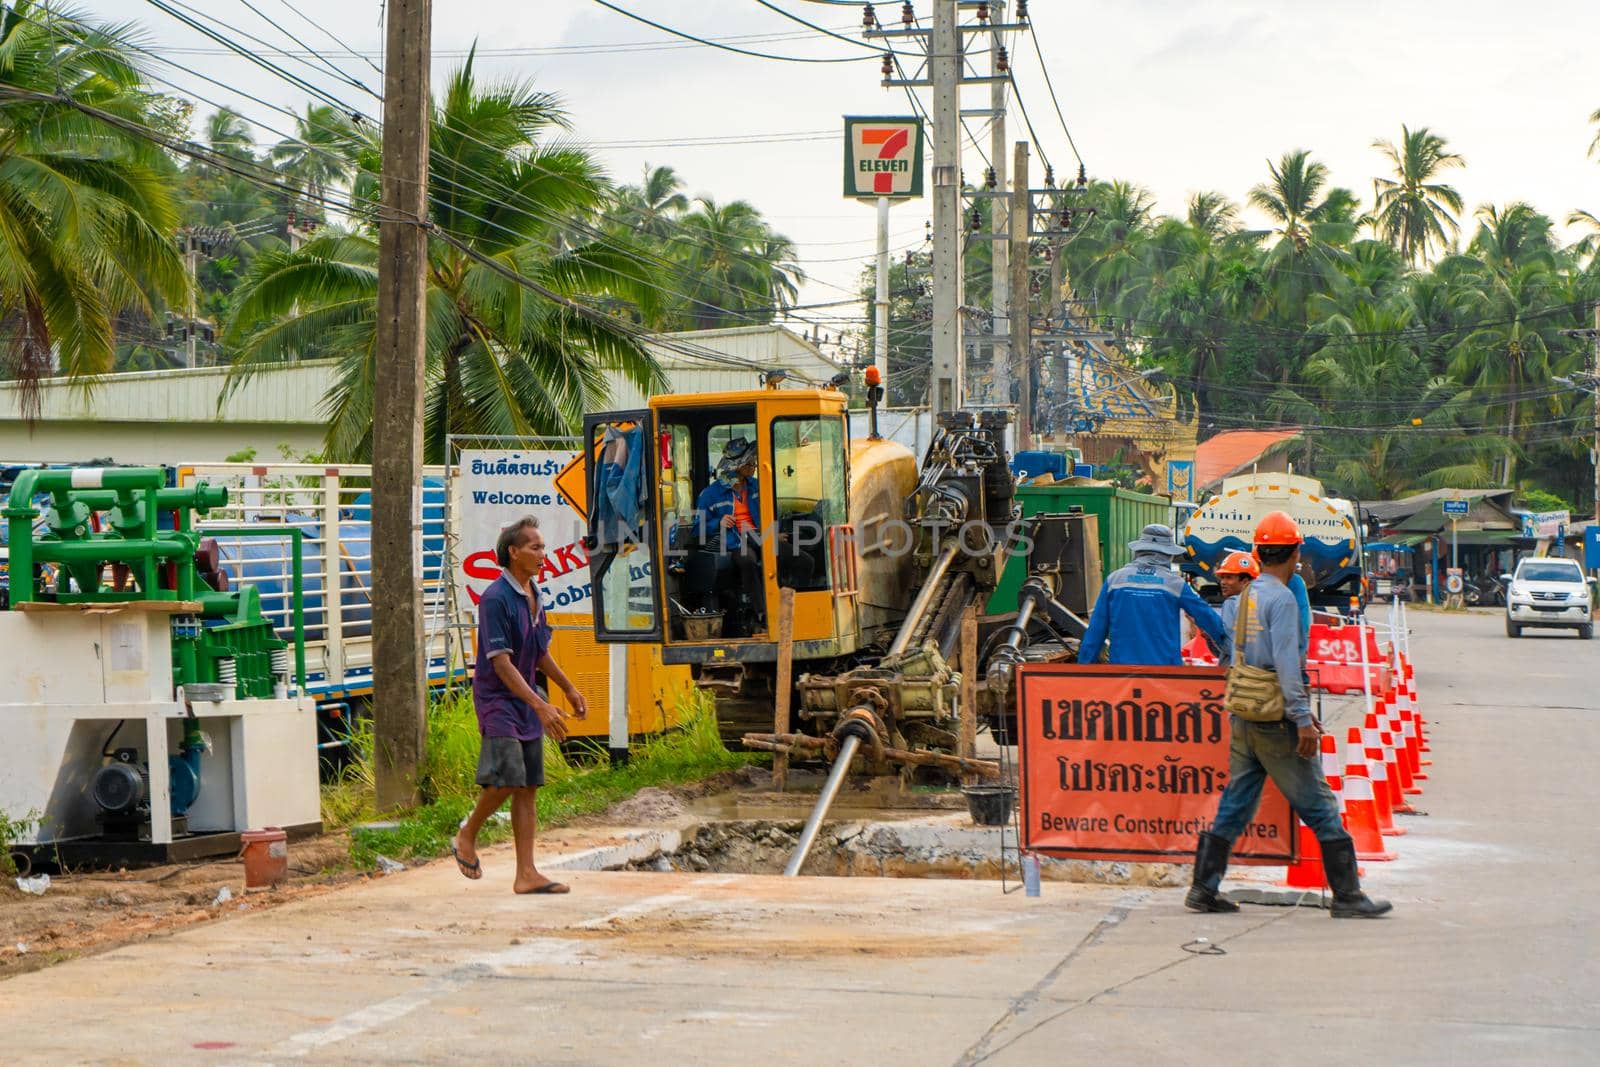 Workers removed a layer of asphalt from the road to lay pipes. Repair construction work on the street of the island in Thailand by Try_my_best